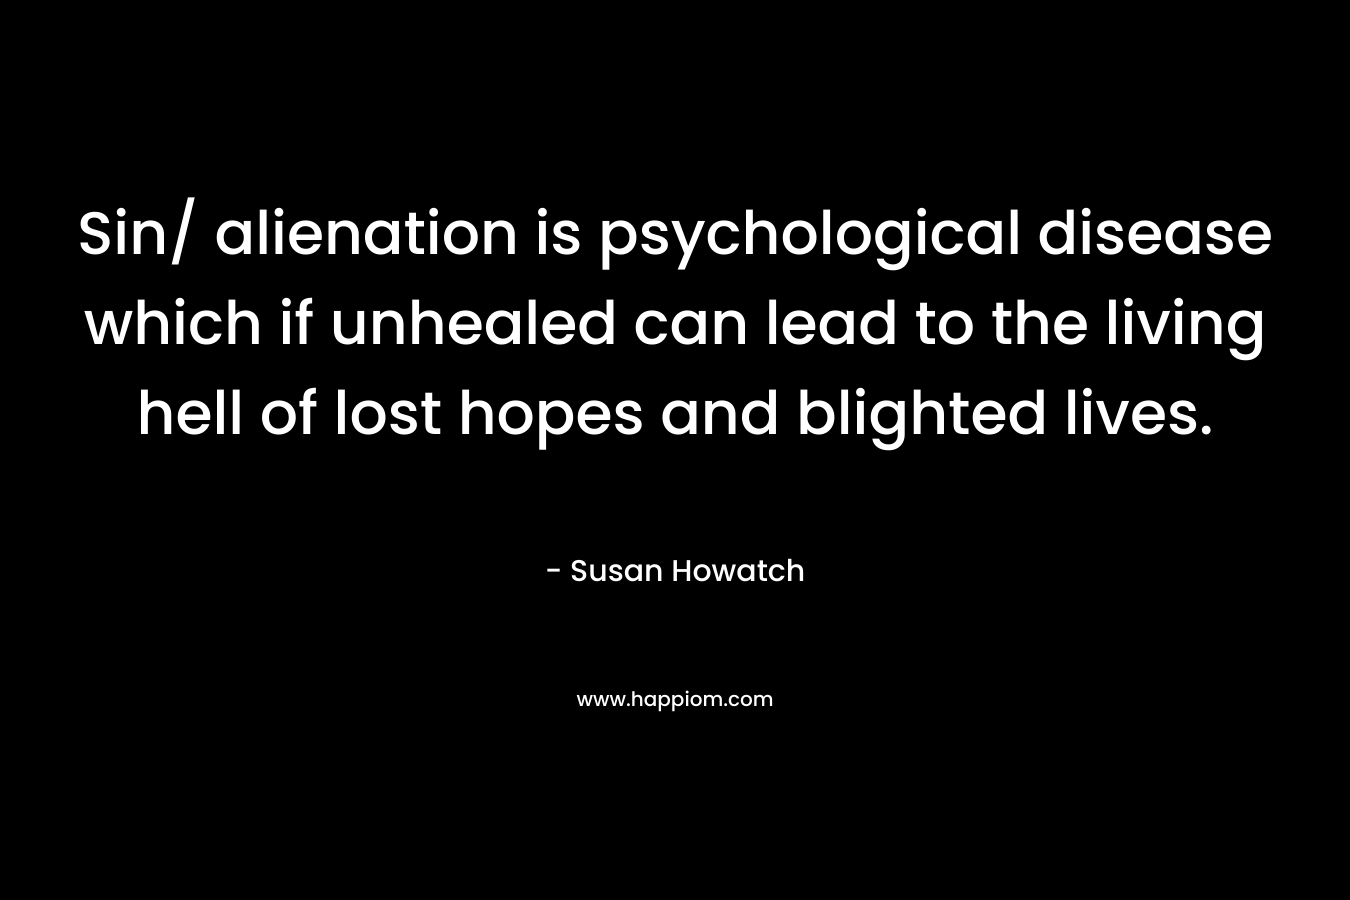 Sin/ alienation is psychological disease which if unhealed can lead to the living hell of lost hopes and blighted lives. – Susan Howatch